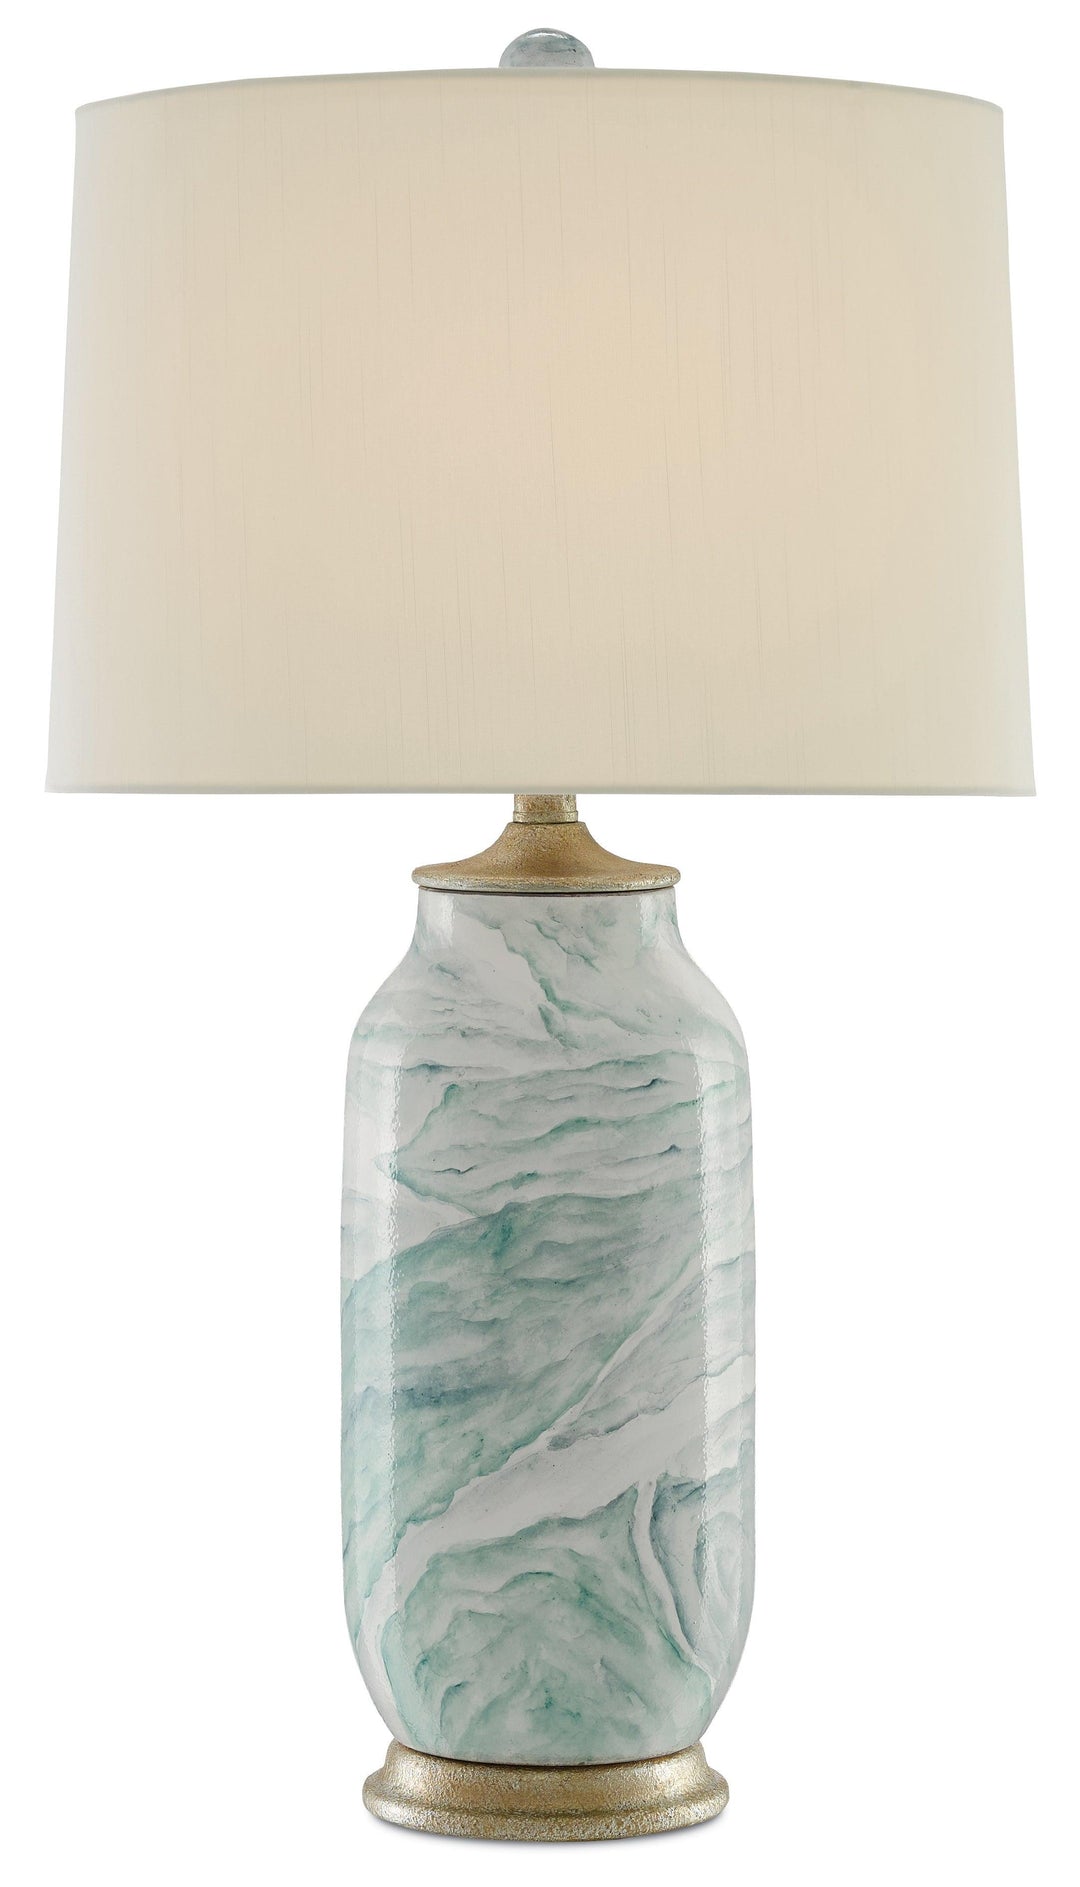 Sarcelle Table Lamp - Casey & Company